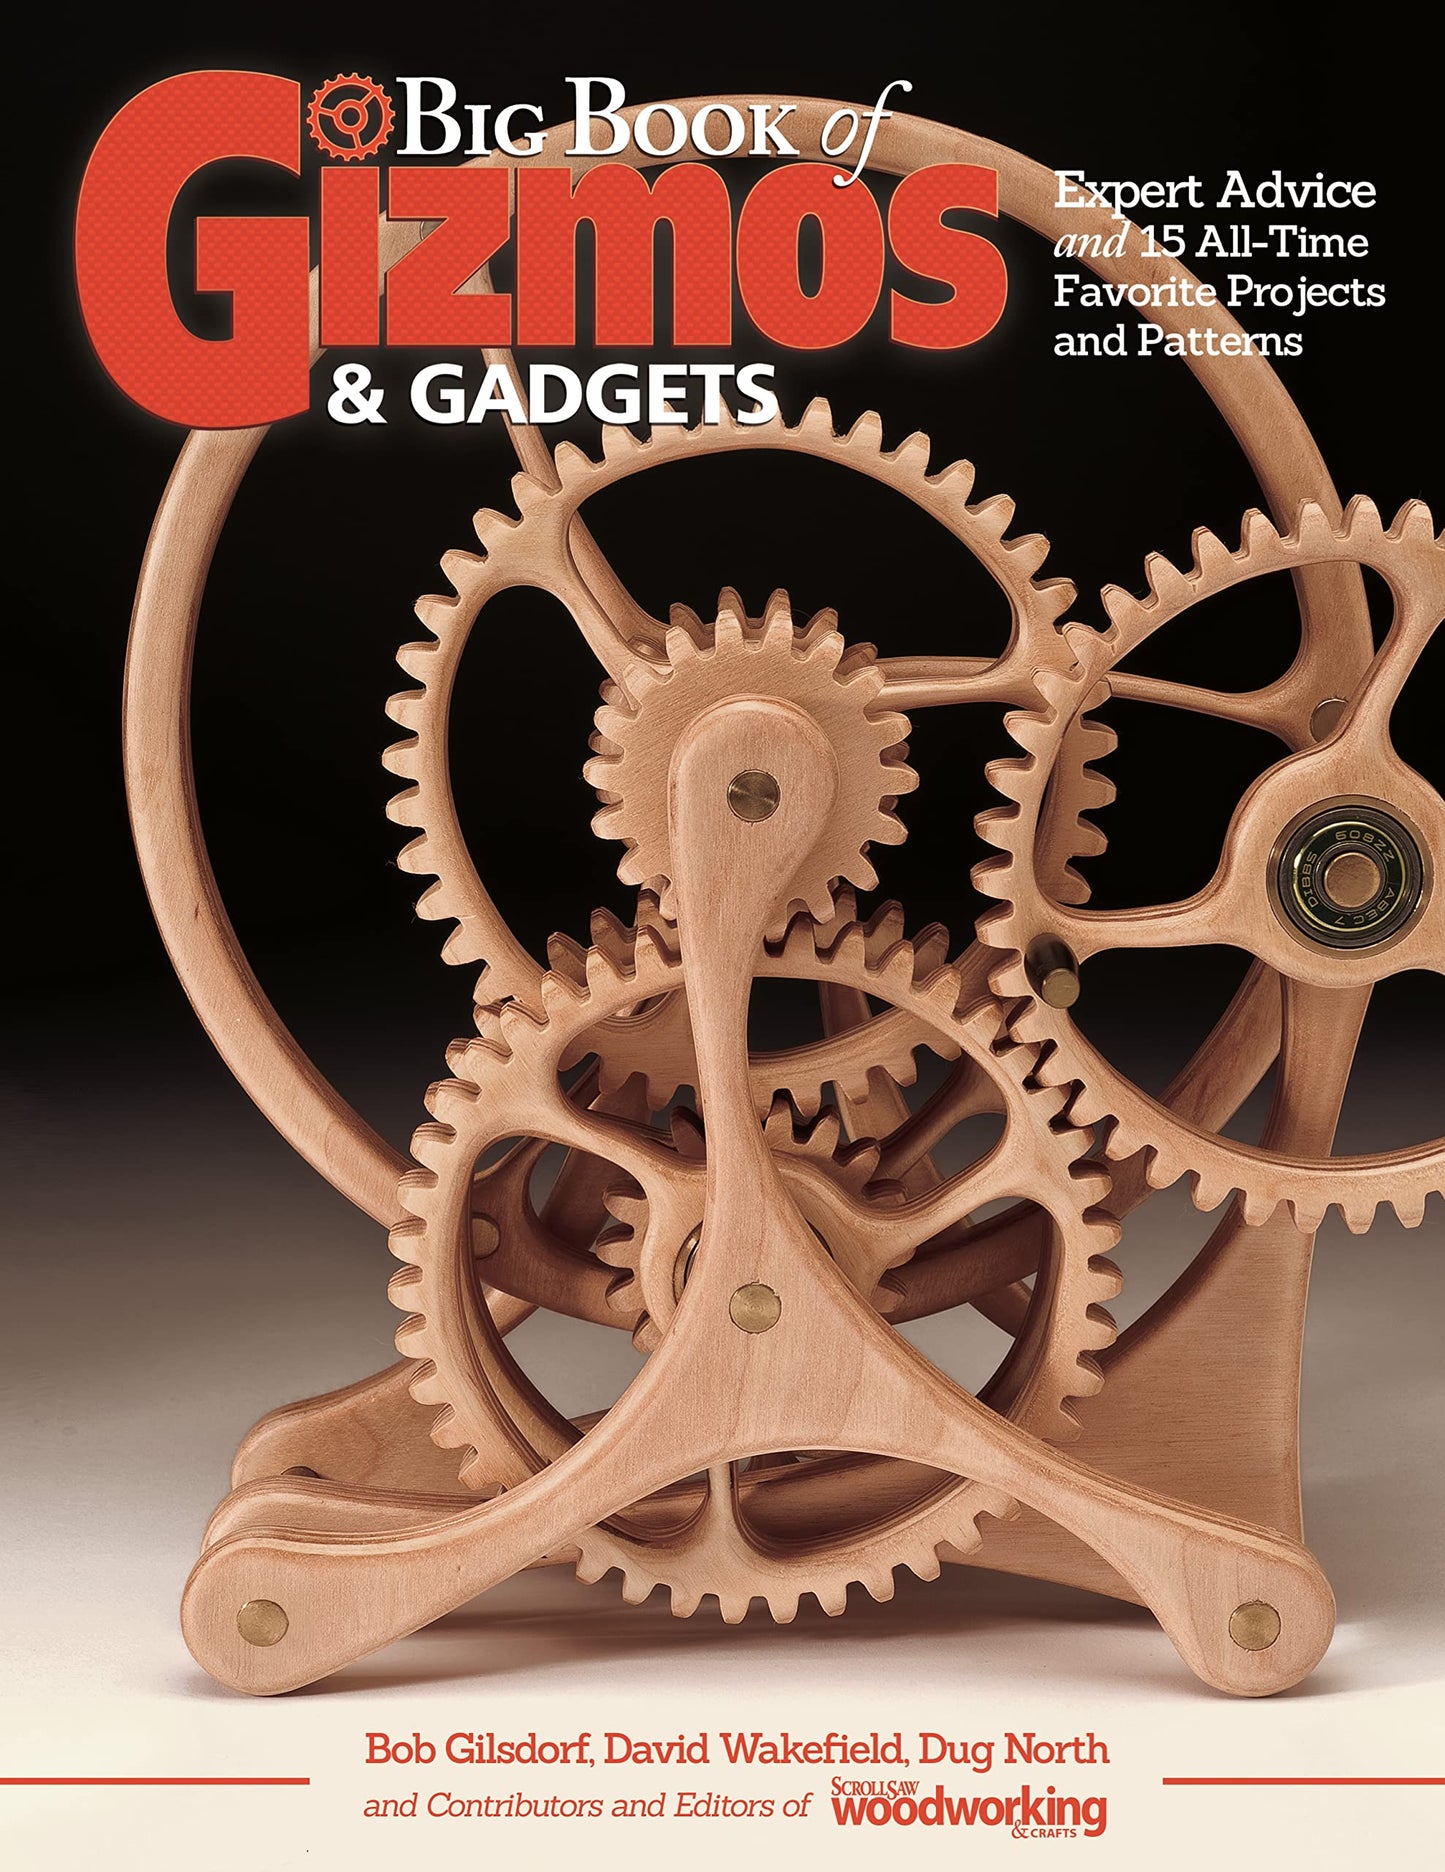 Big Book of Gizmos & Gadgets: Expert Advice and 15 All-Time Favorite Projects and Patterns (Fox Chapel Publishing) Step-by-Step Wooden Mechanical